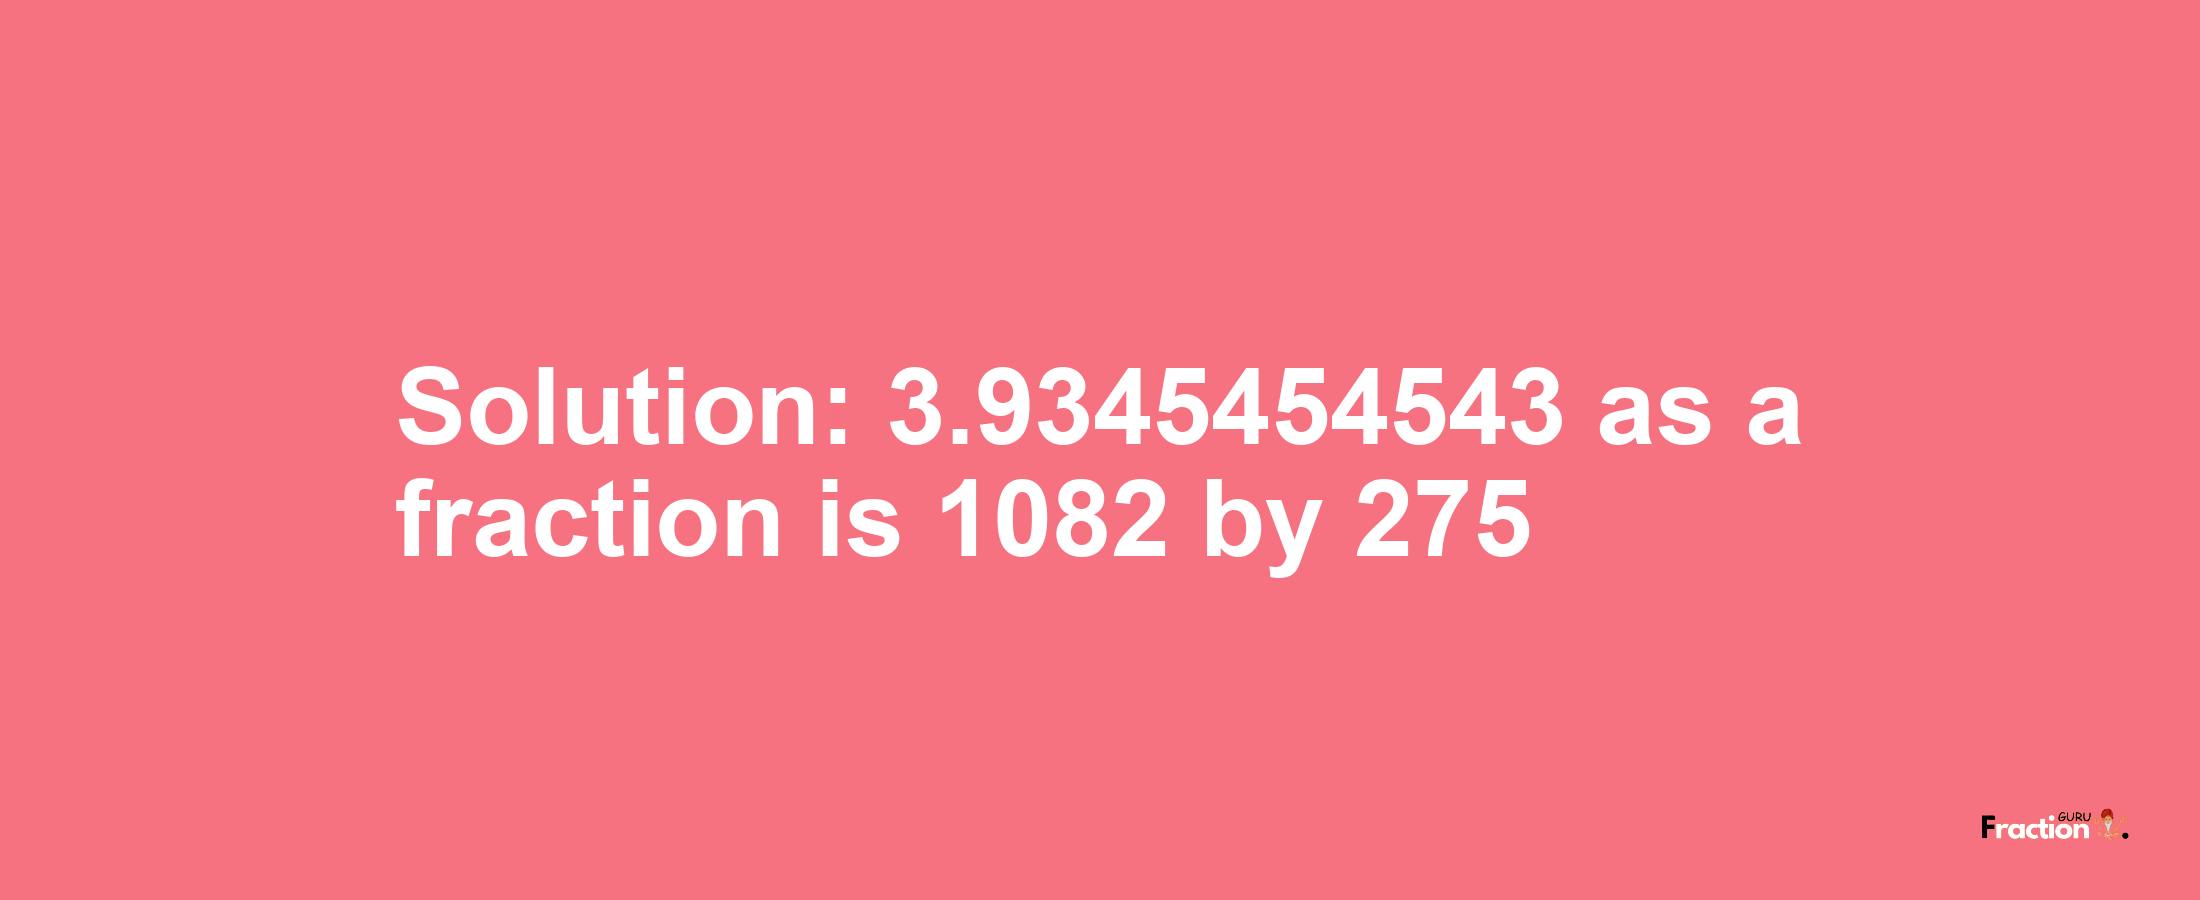 Solution:3.9345454543 as a fraction is 1082/275